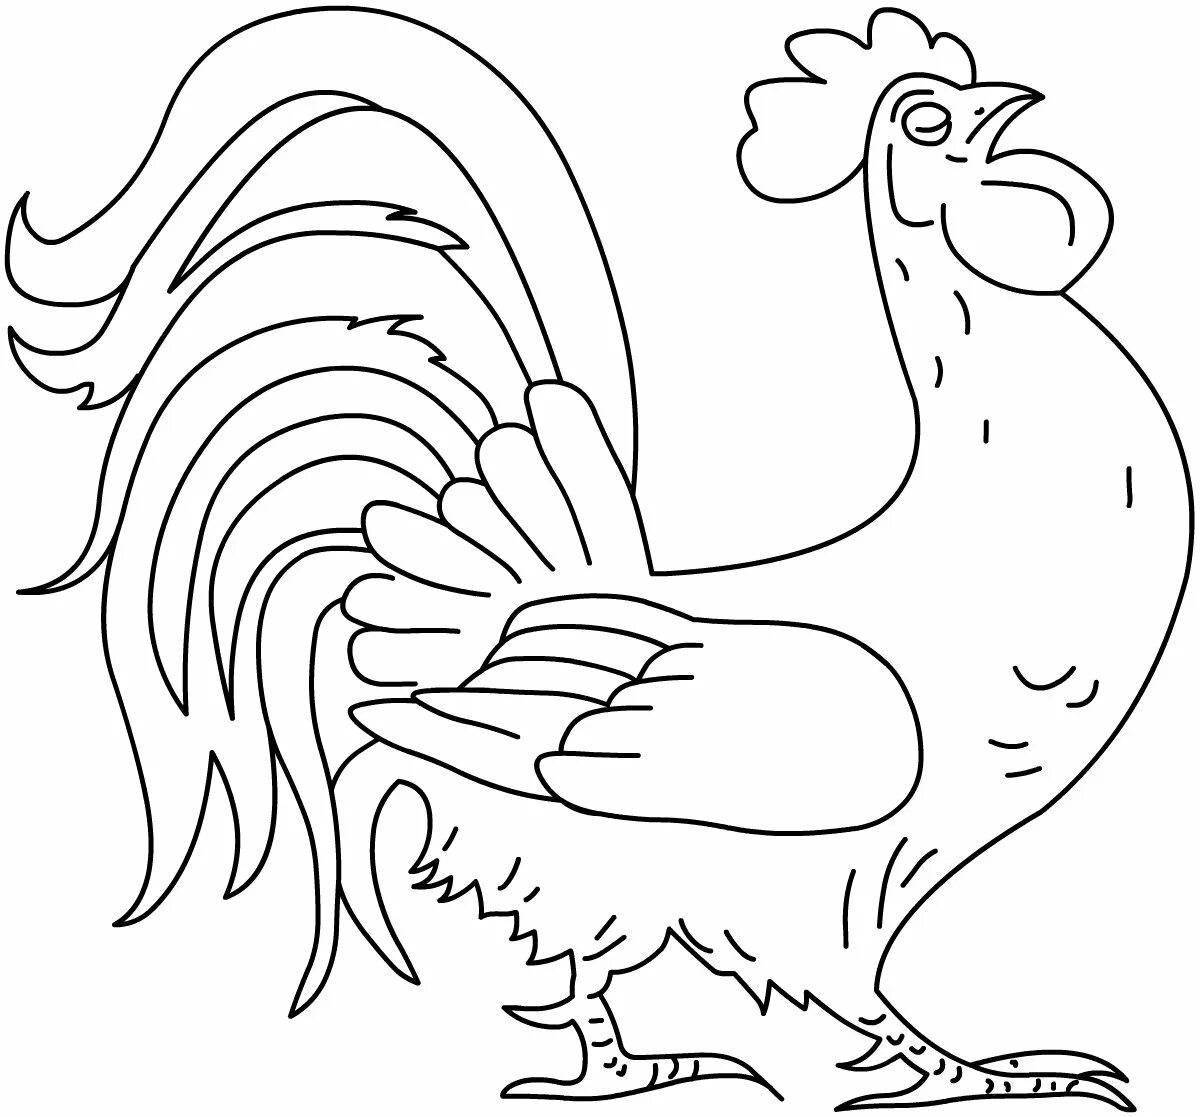 Animated drawing of a cockerel